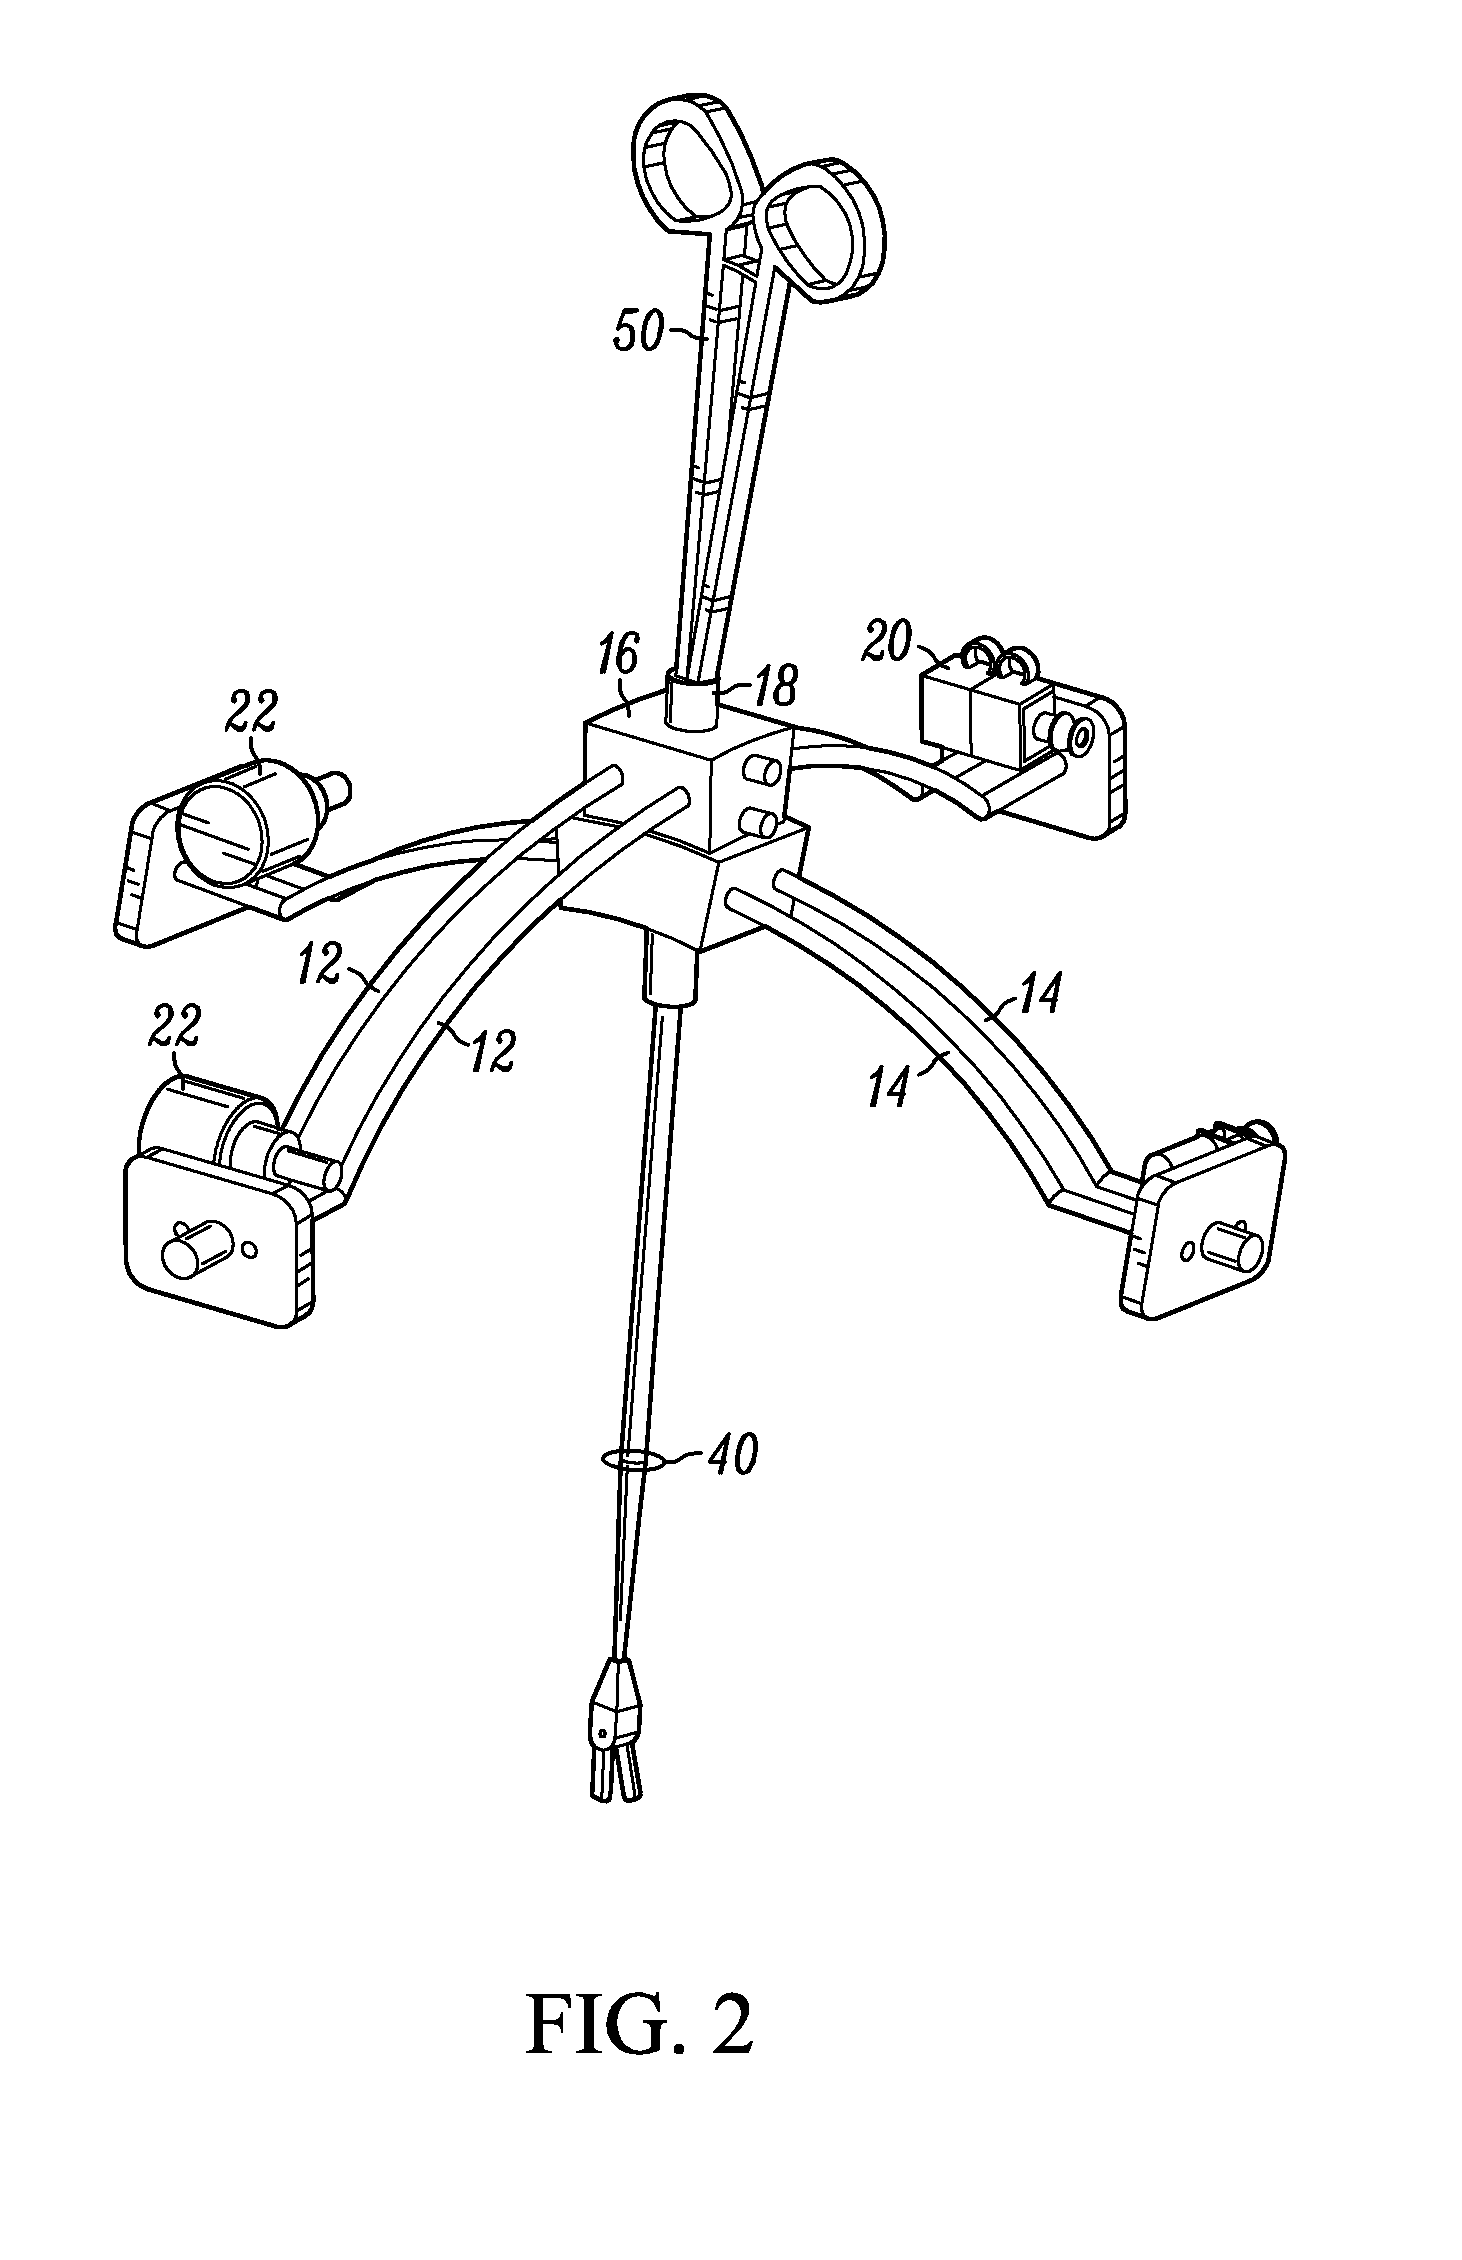 Manipulator For Surgical Tools